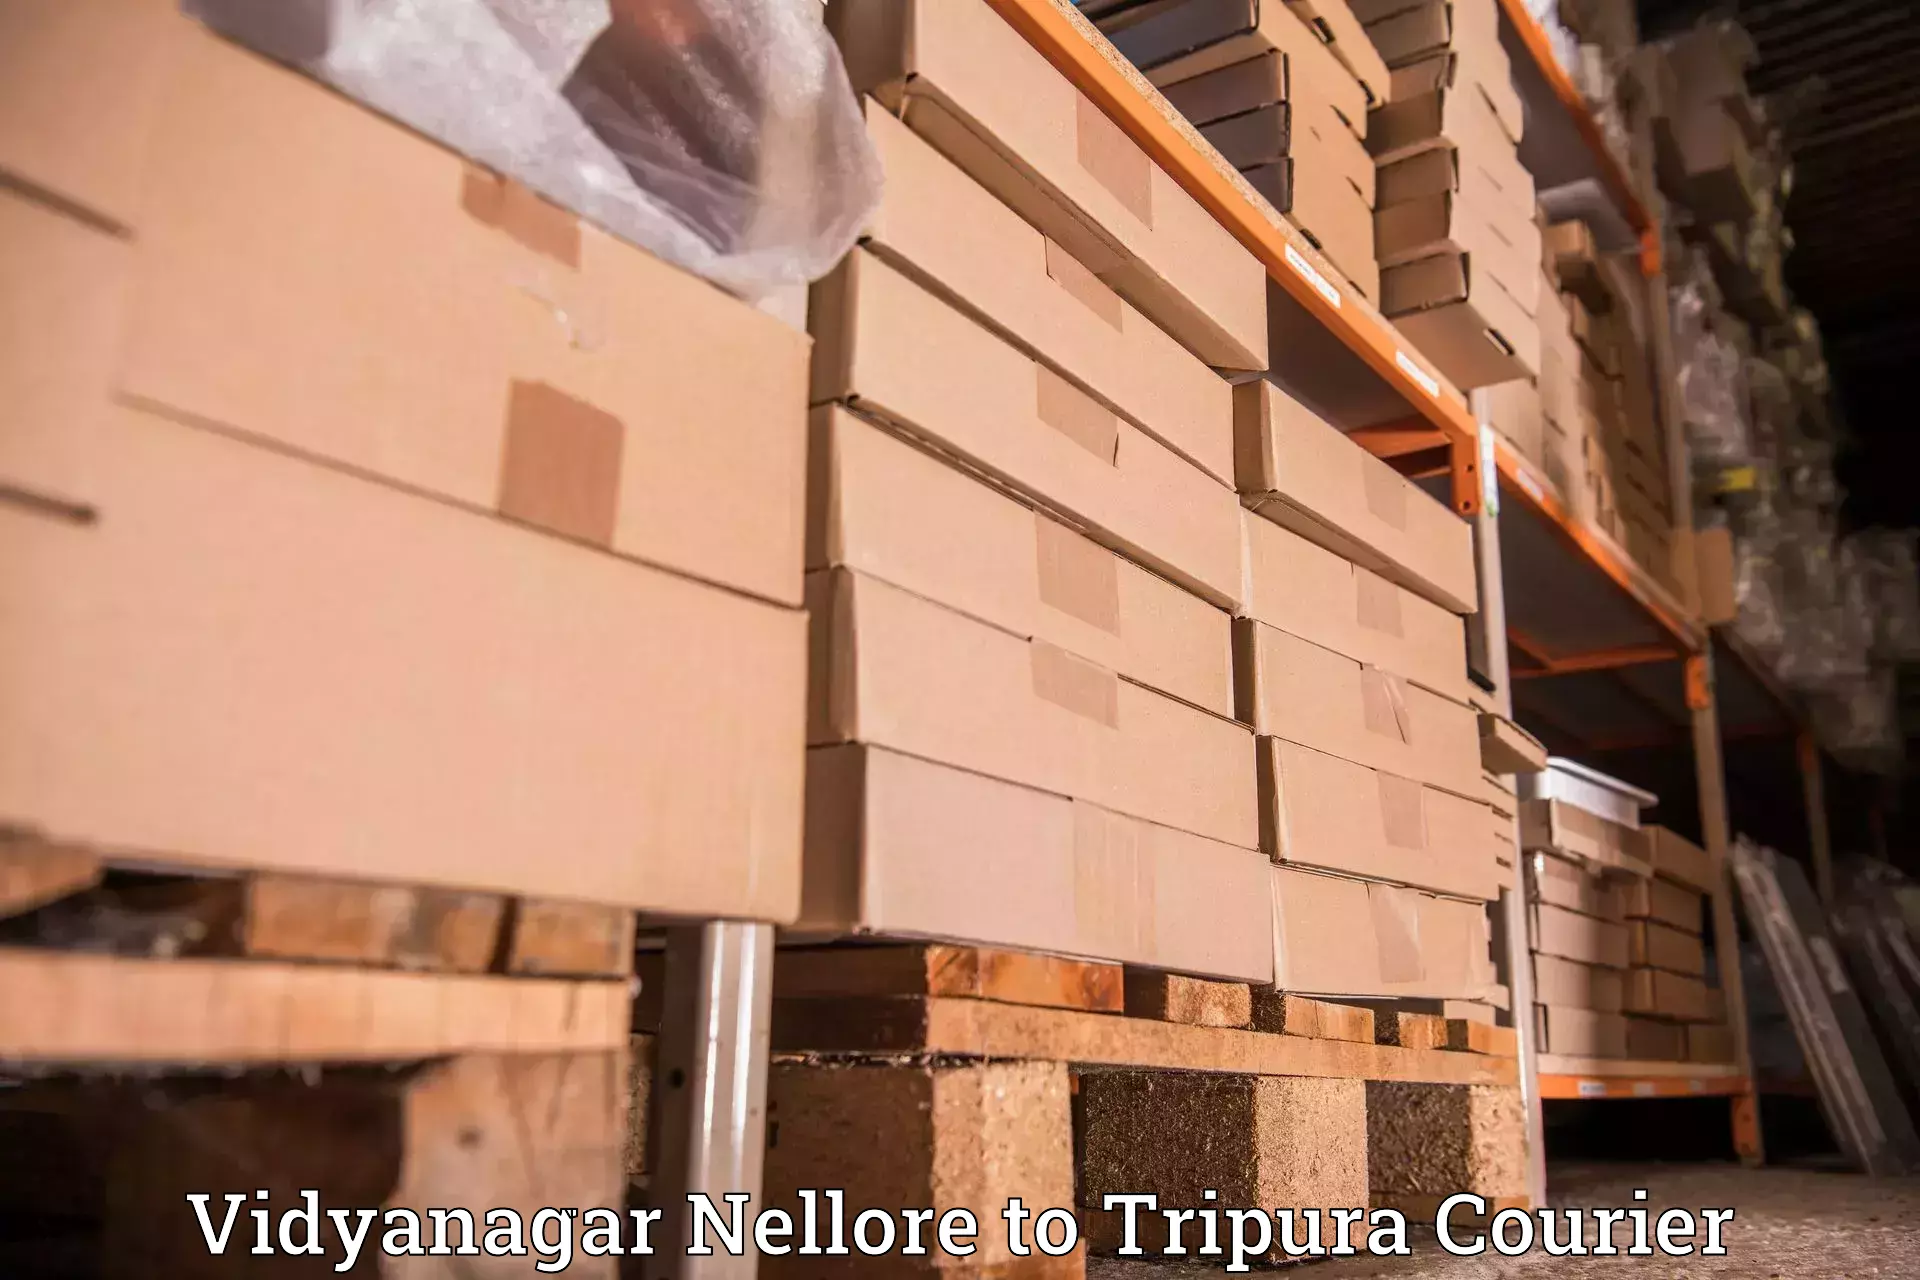 State-of-the-art courier technology Vidyanagar Nellore to North Tripura